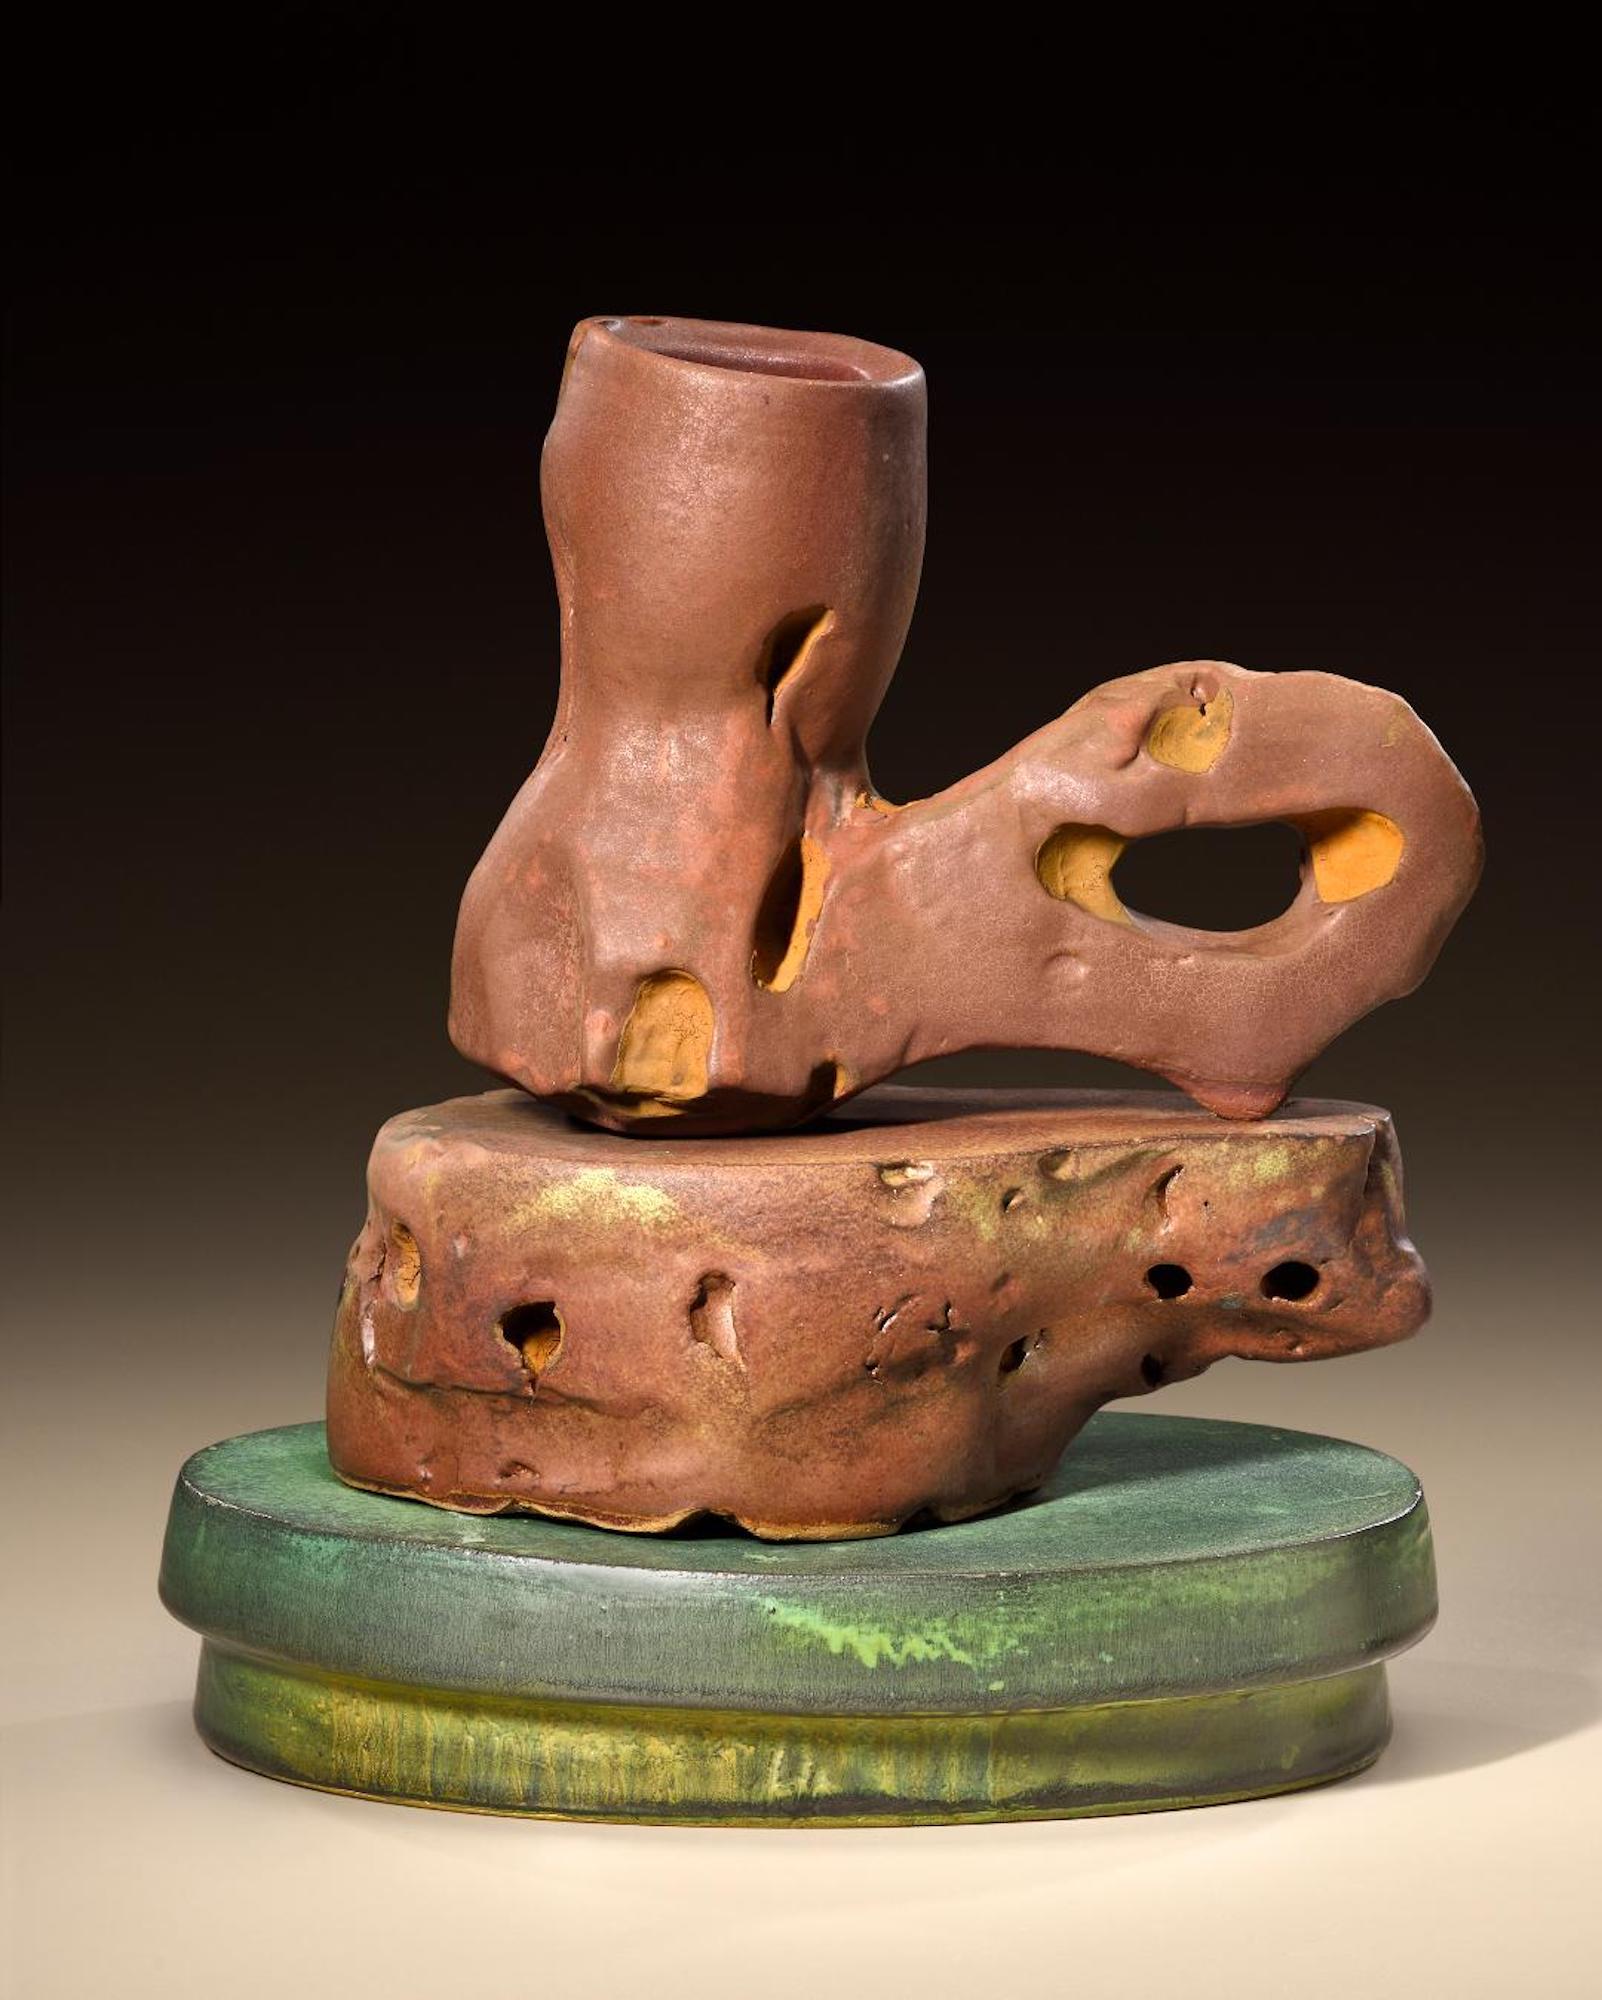 Richard Hirsch Ceramic Scholar Rock Cup Sculpture #51, 2018 In Excellent Condition For Sale In New York, NY